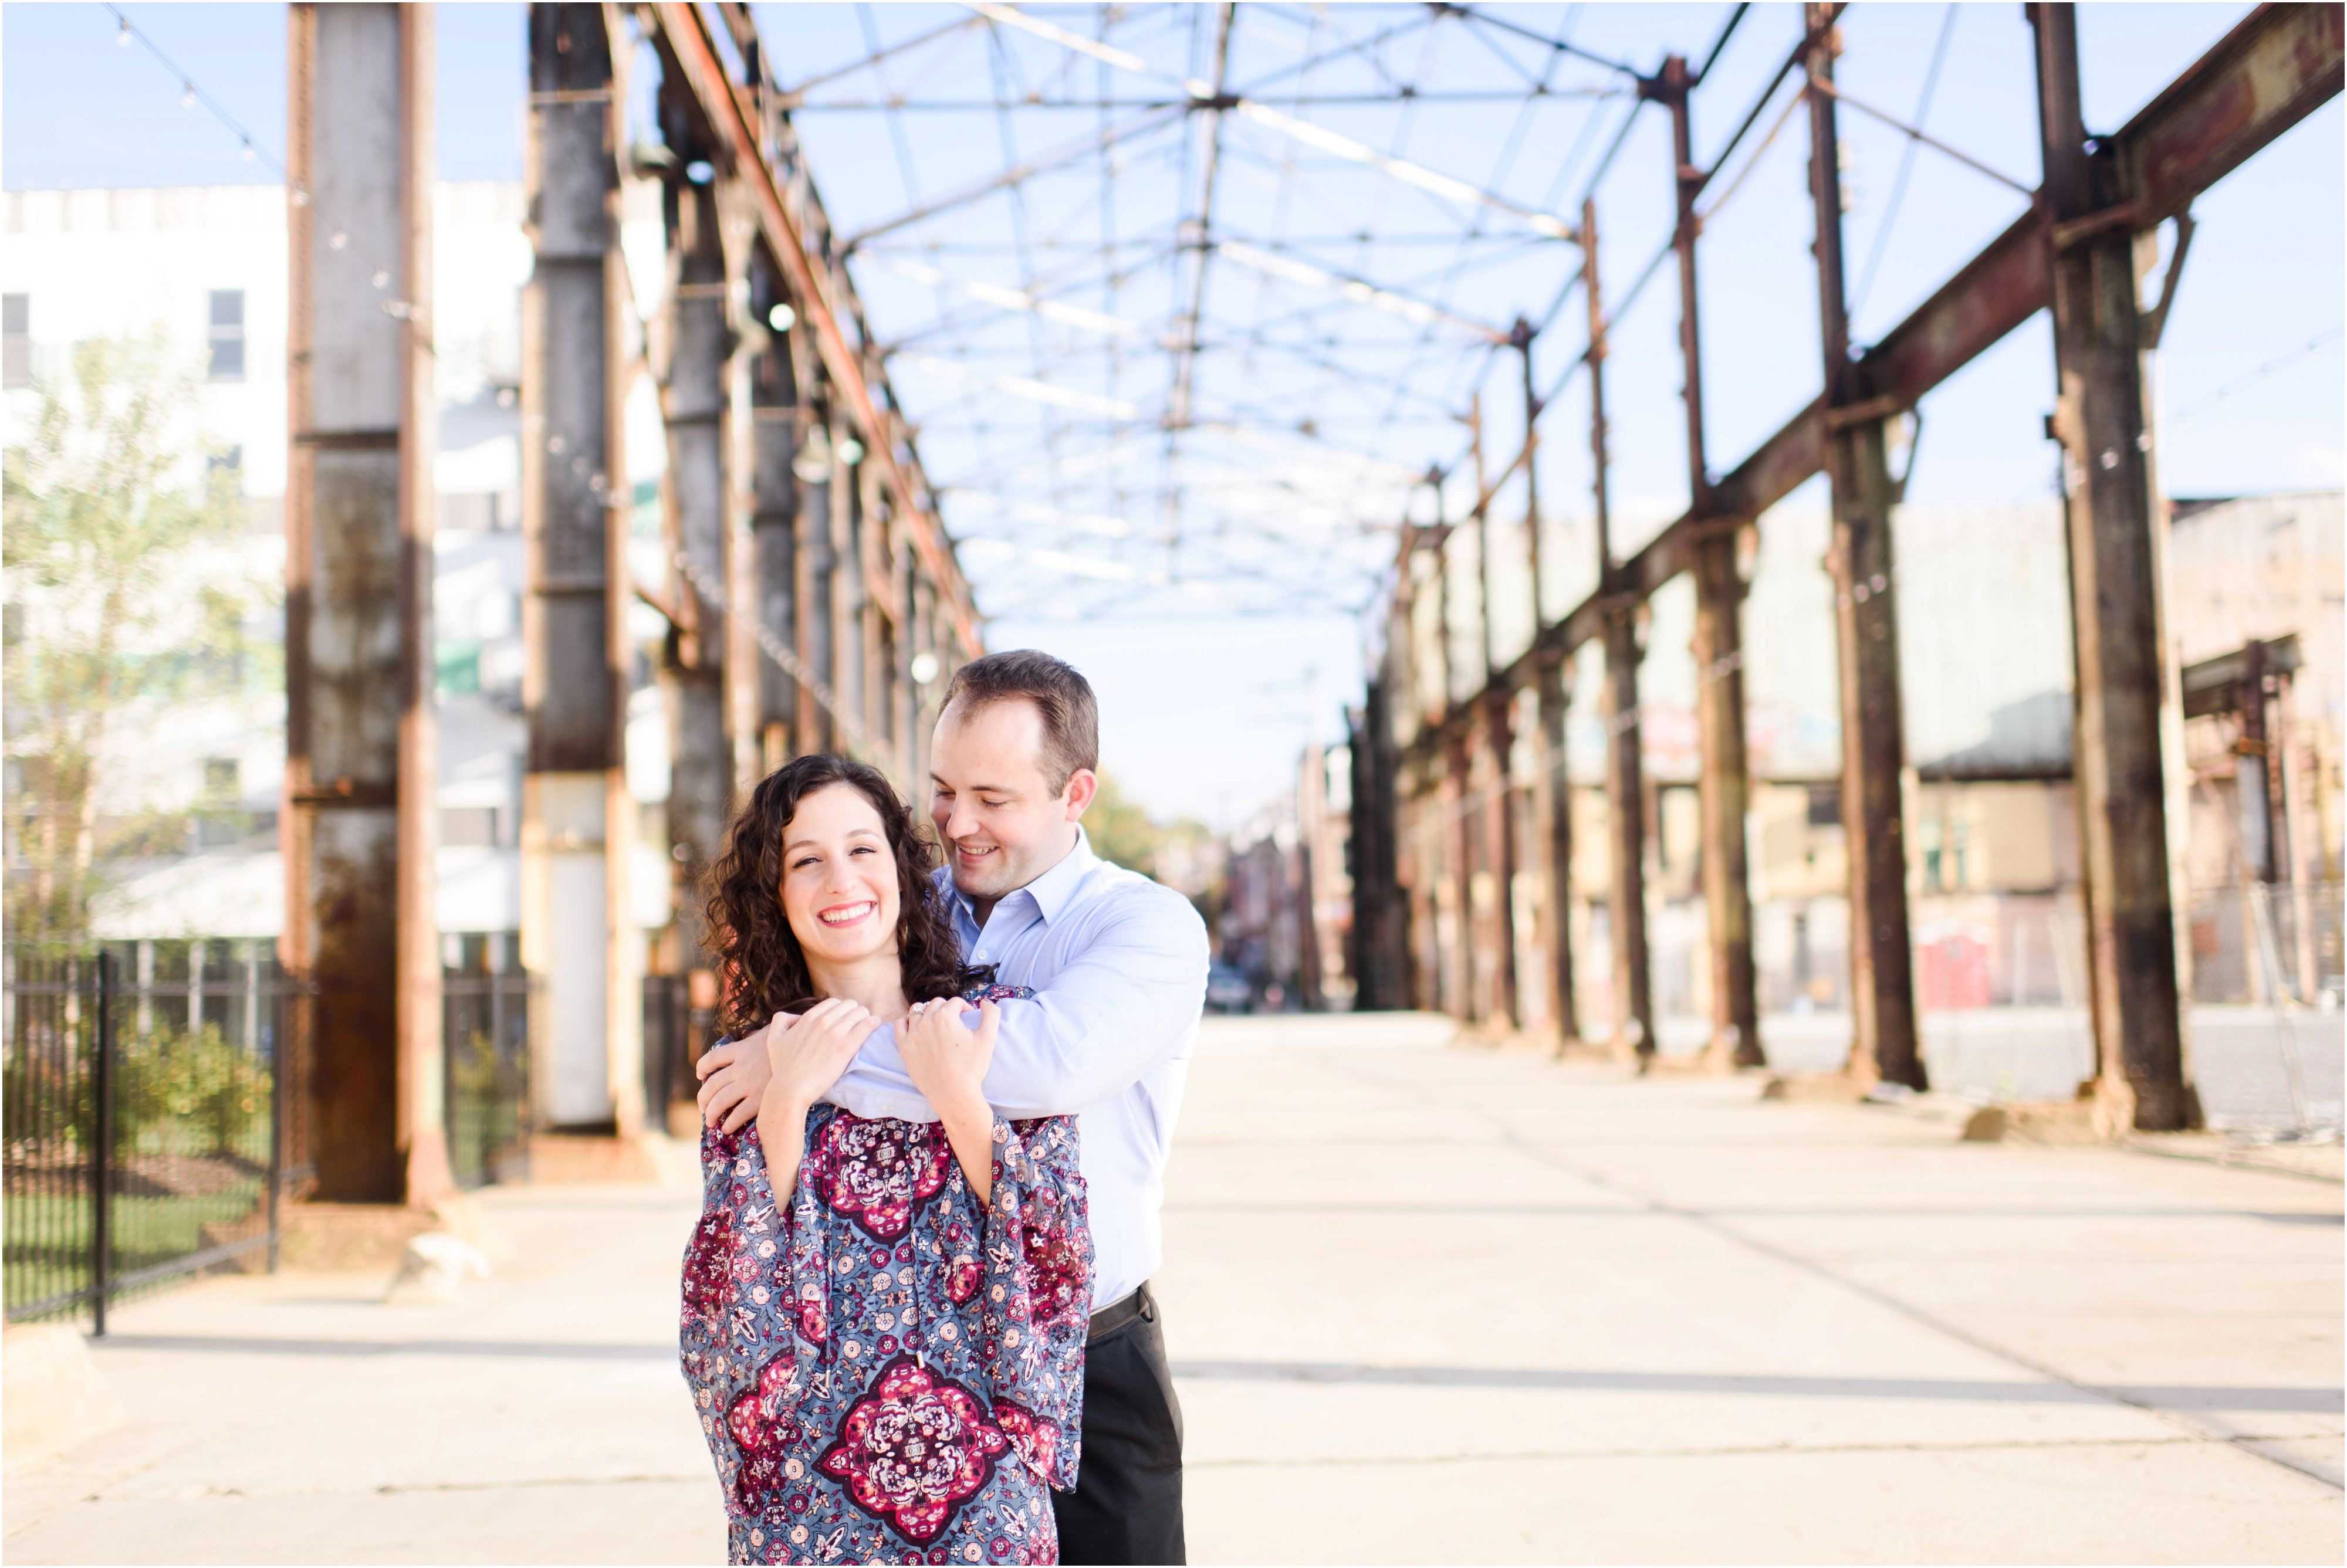 lawrenceville pittsburgh engagement photos